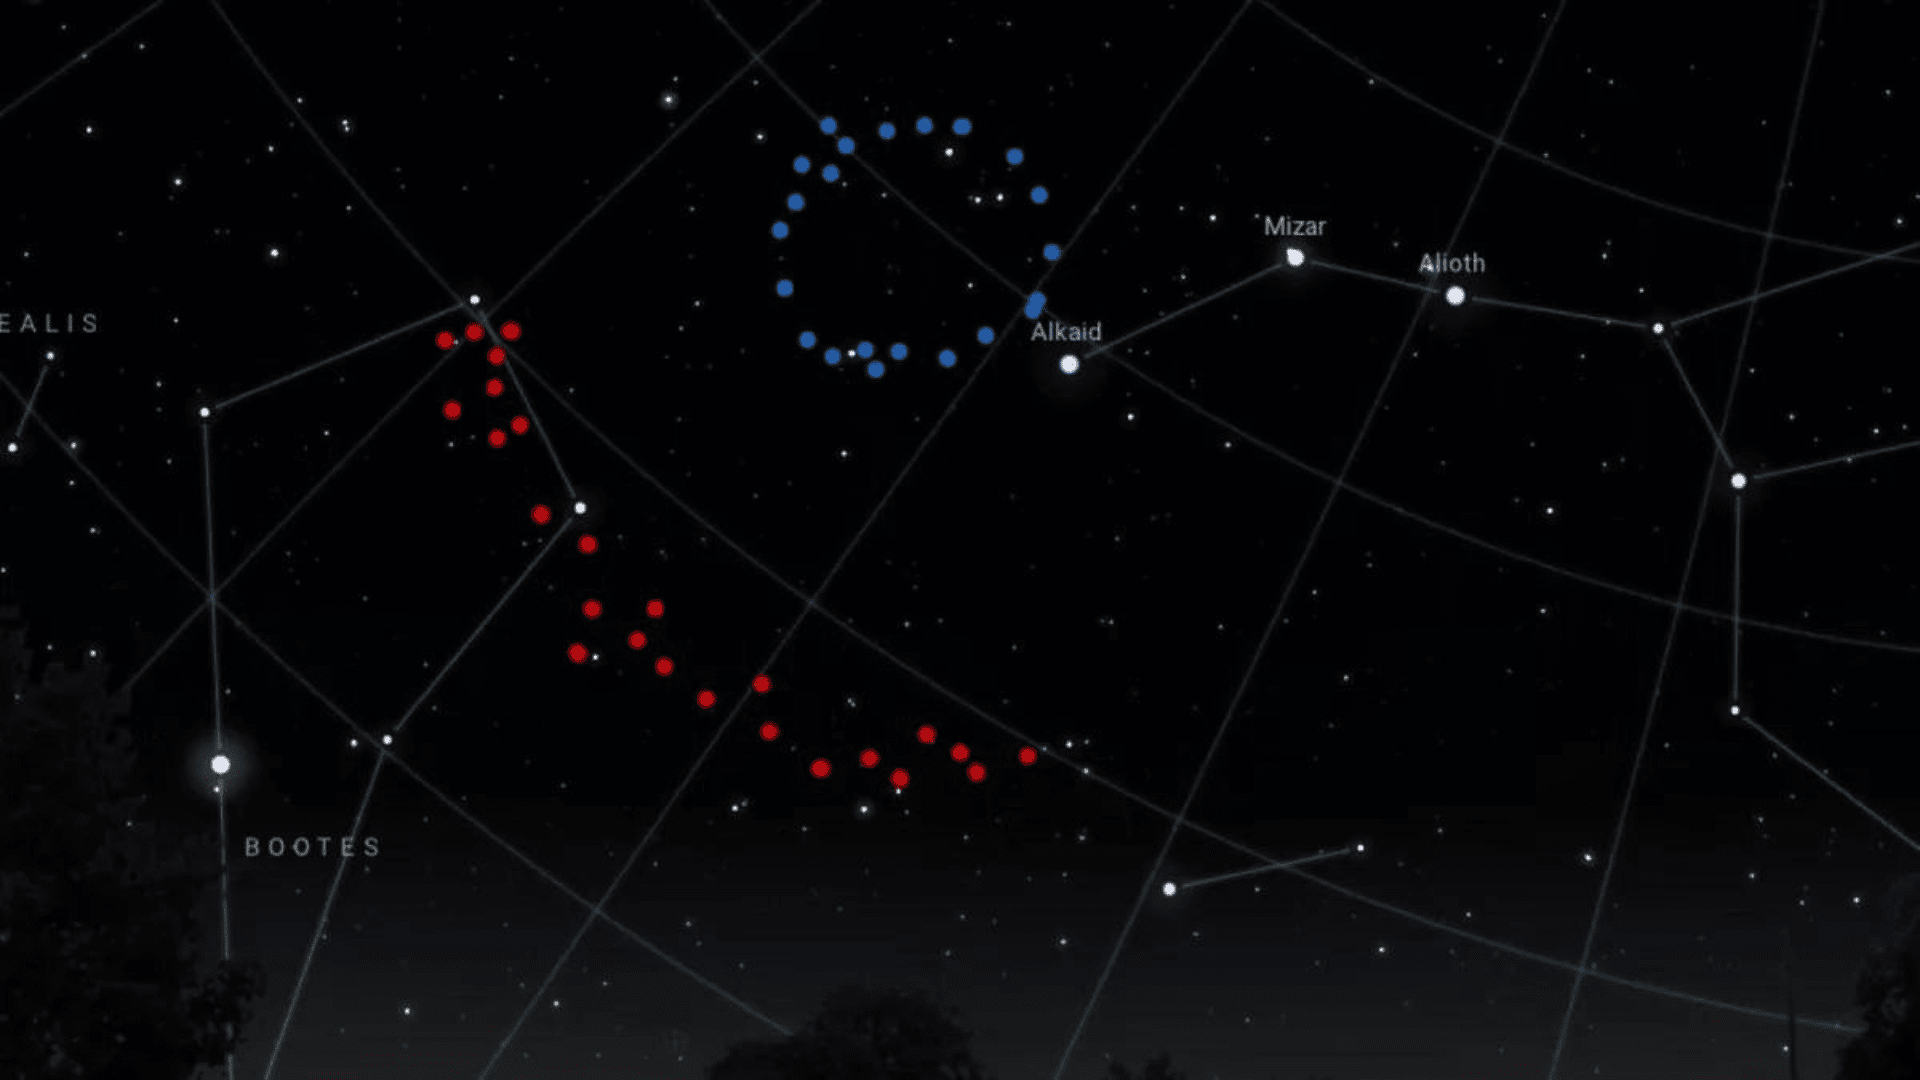 An artistic impression of what the Big Ring (shown in blue) and Giant Arc (shown in red) would look like in the sky Stellarium